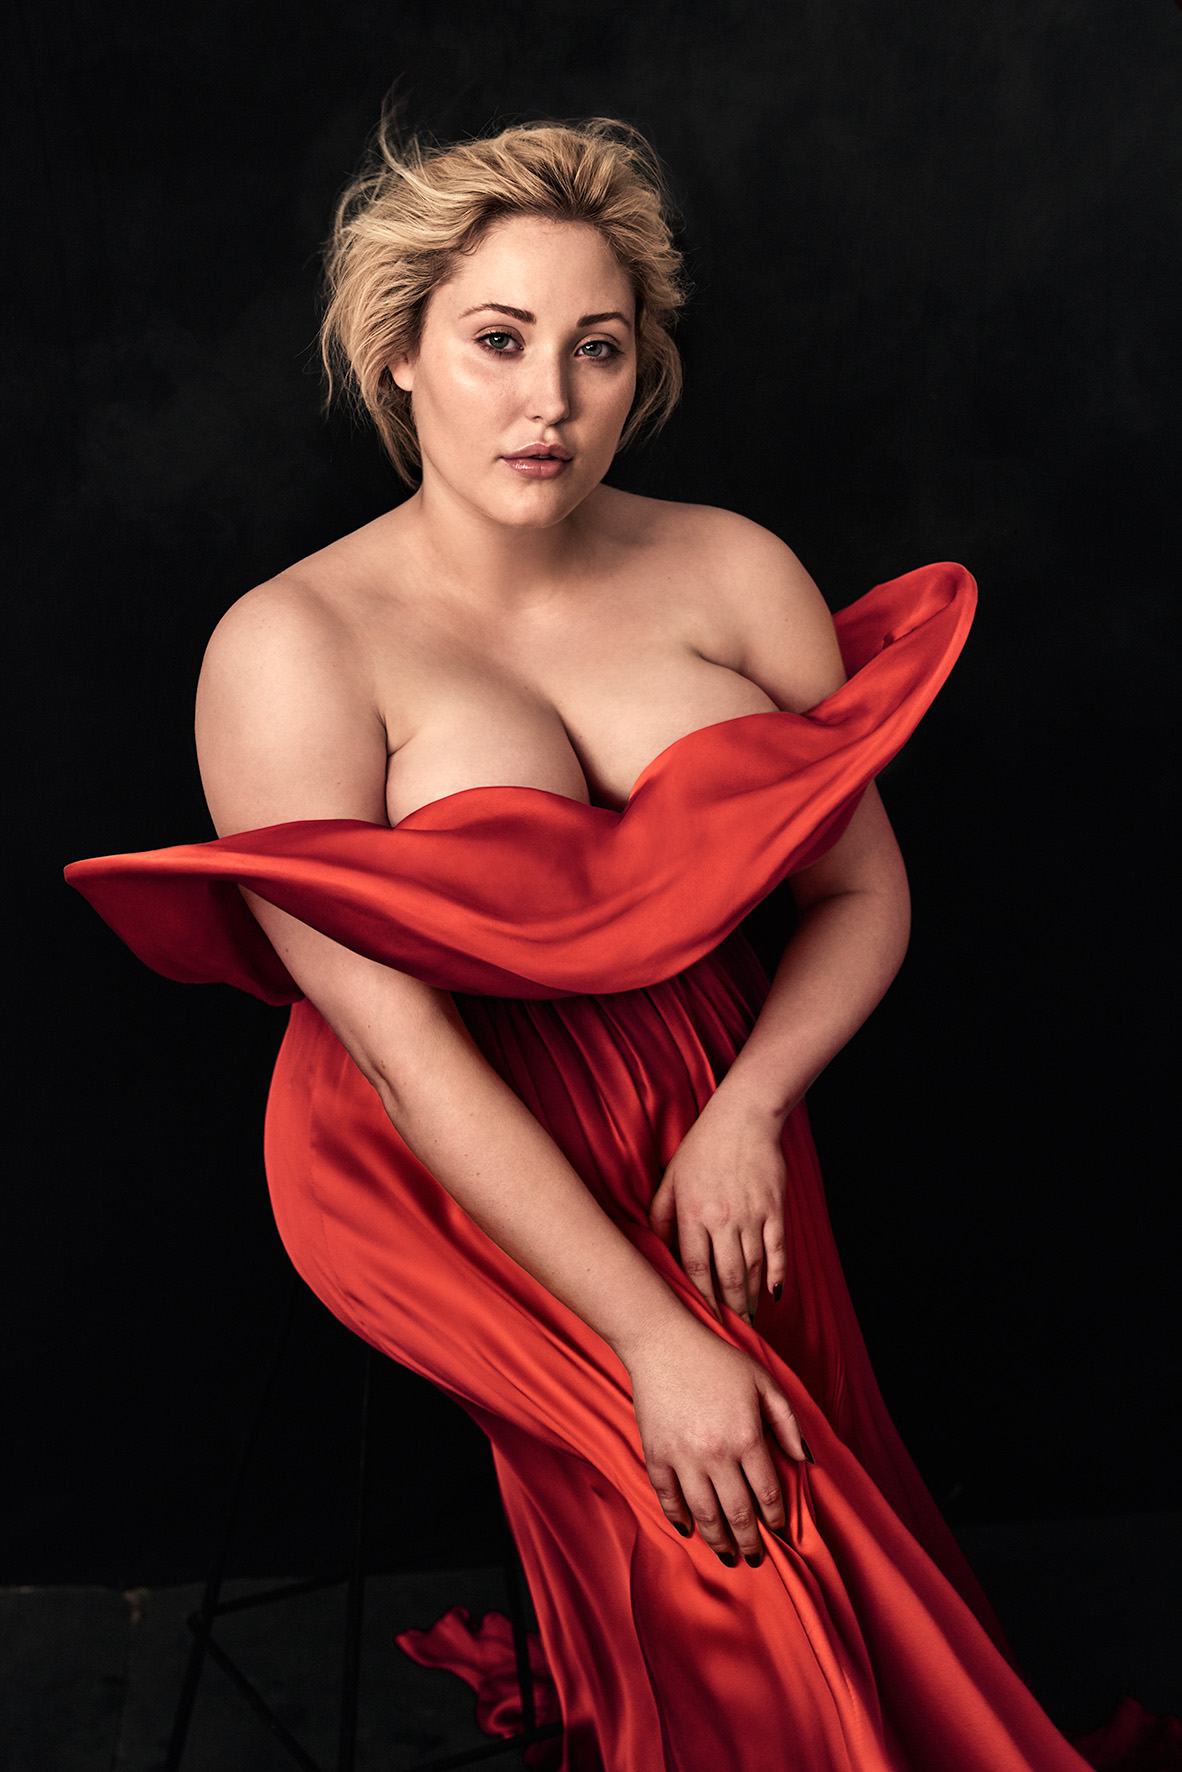 The plus-size model Hayley Hasselhoff (daughter from David Hasselhoff)